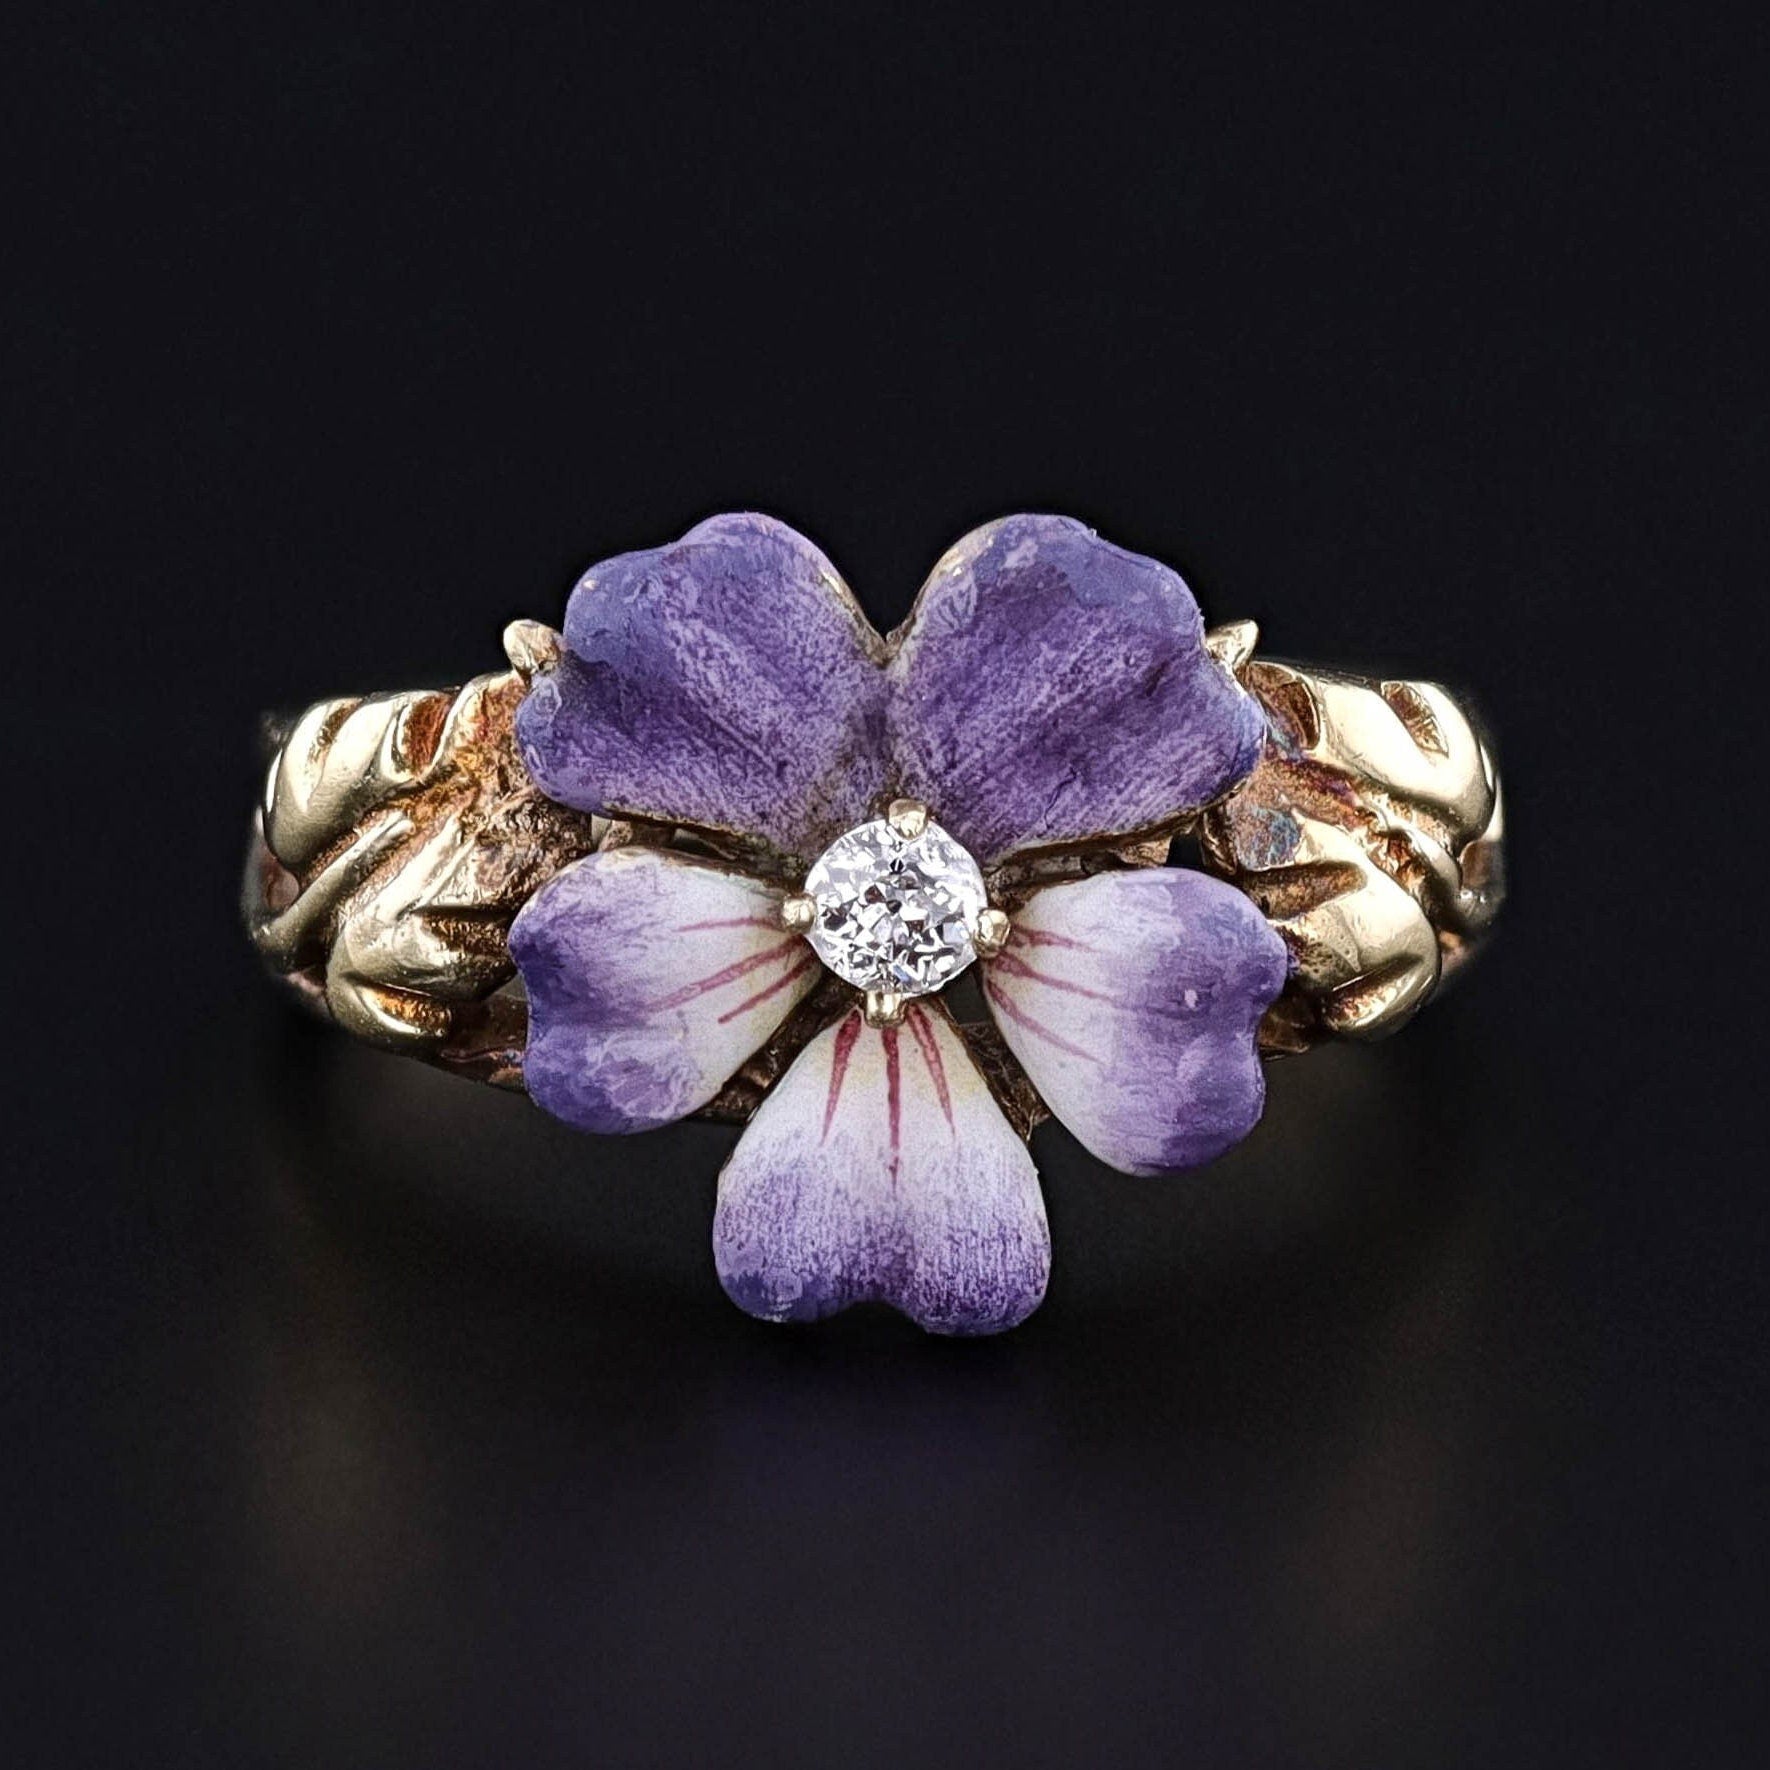 An antique 14k gold enamel and diamond pansy flower ring from the 1920s. The ring is perfect for any jewelry collector, lover of flowers, or gardener.